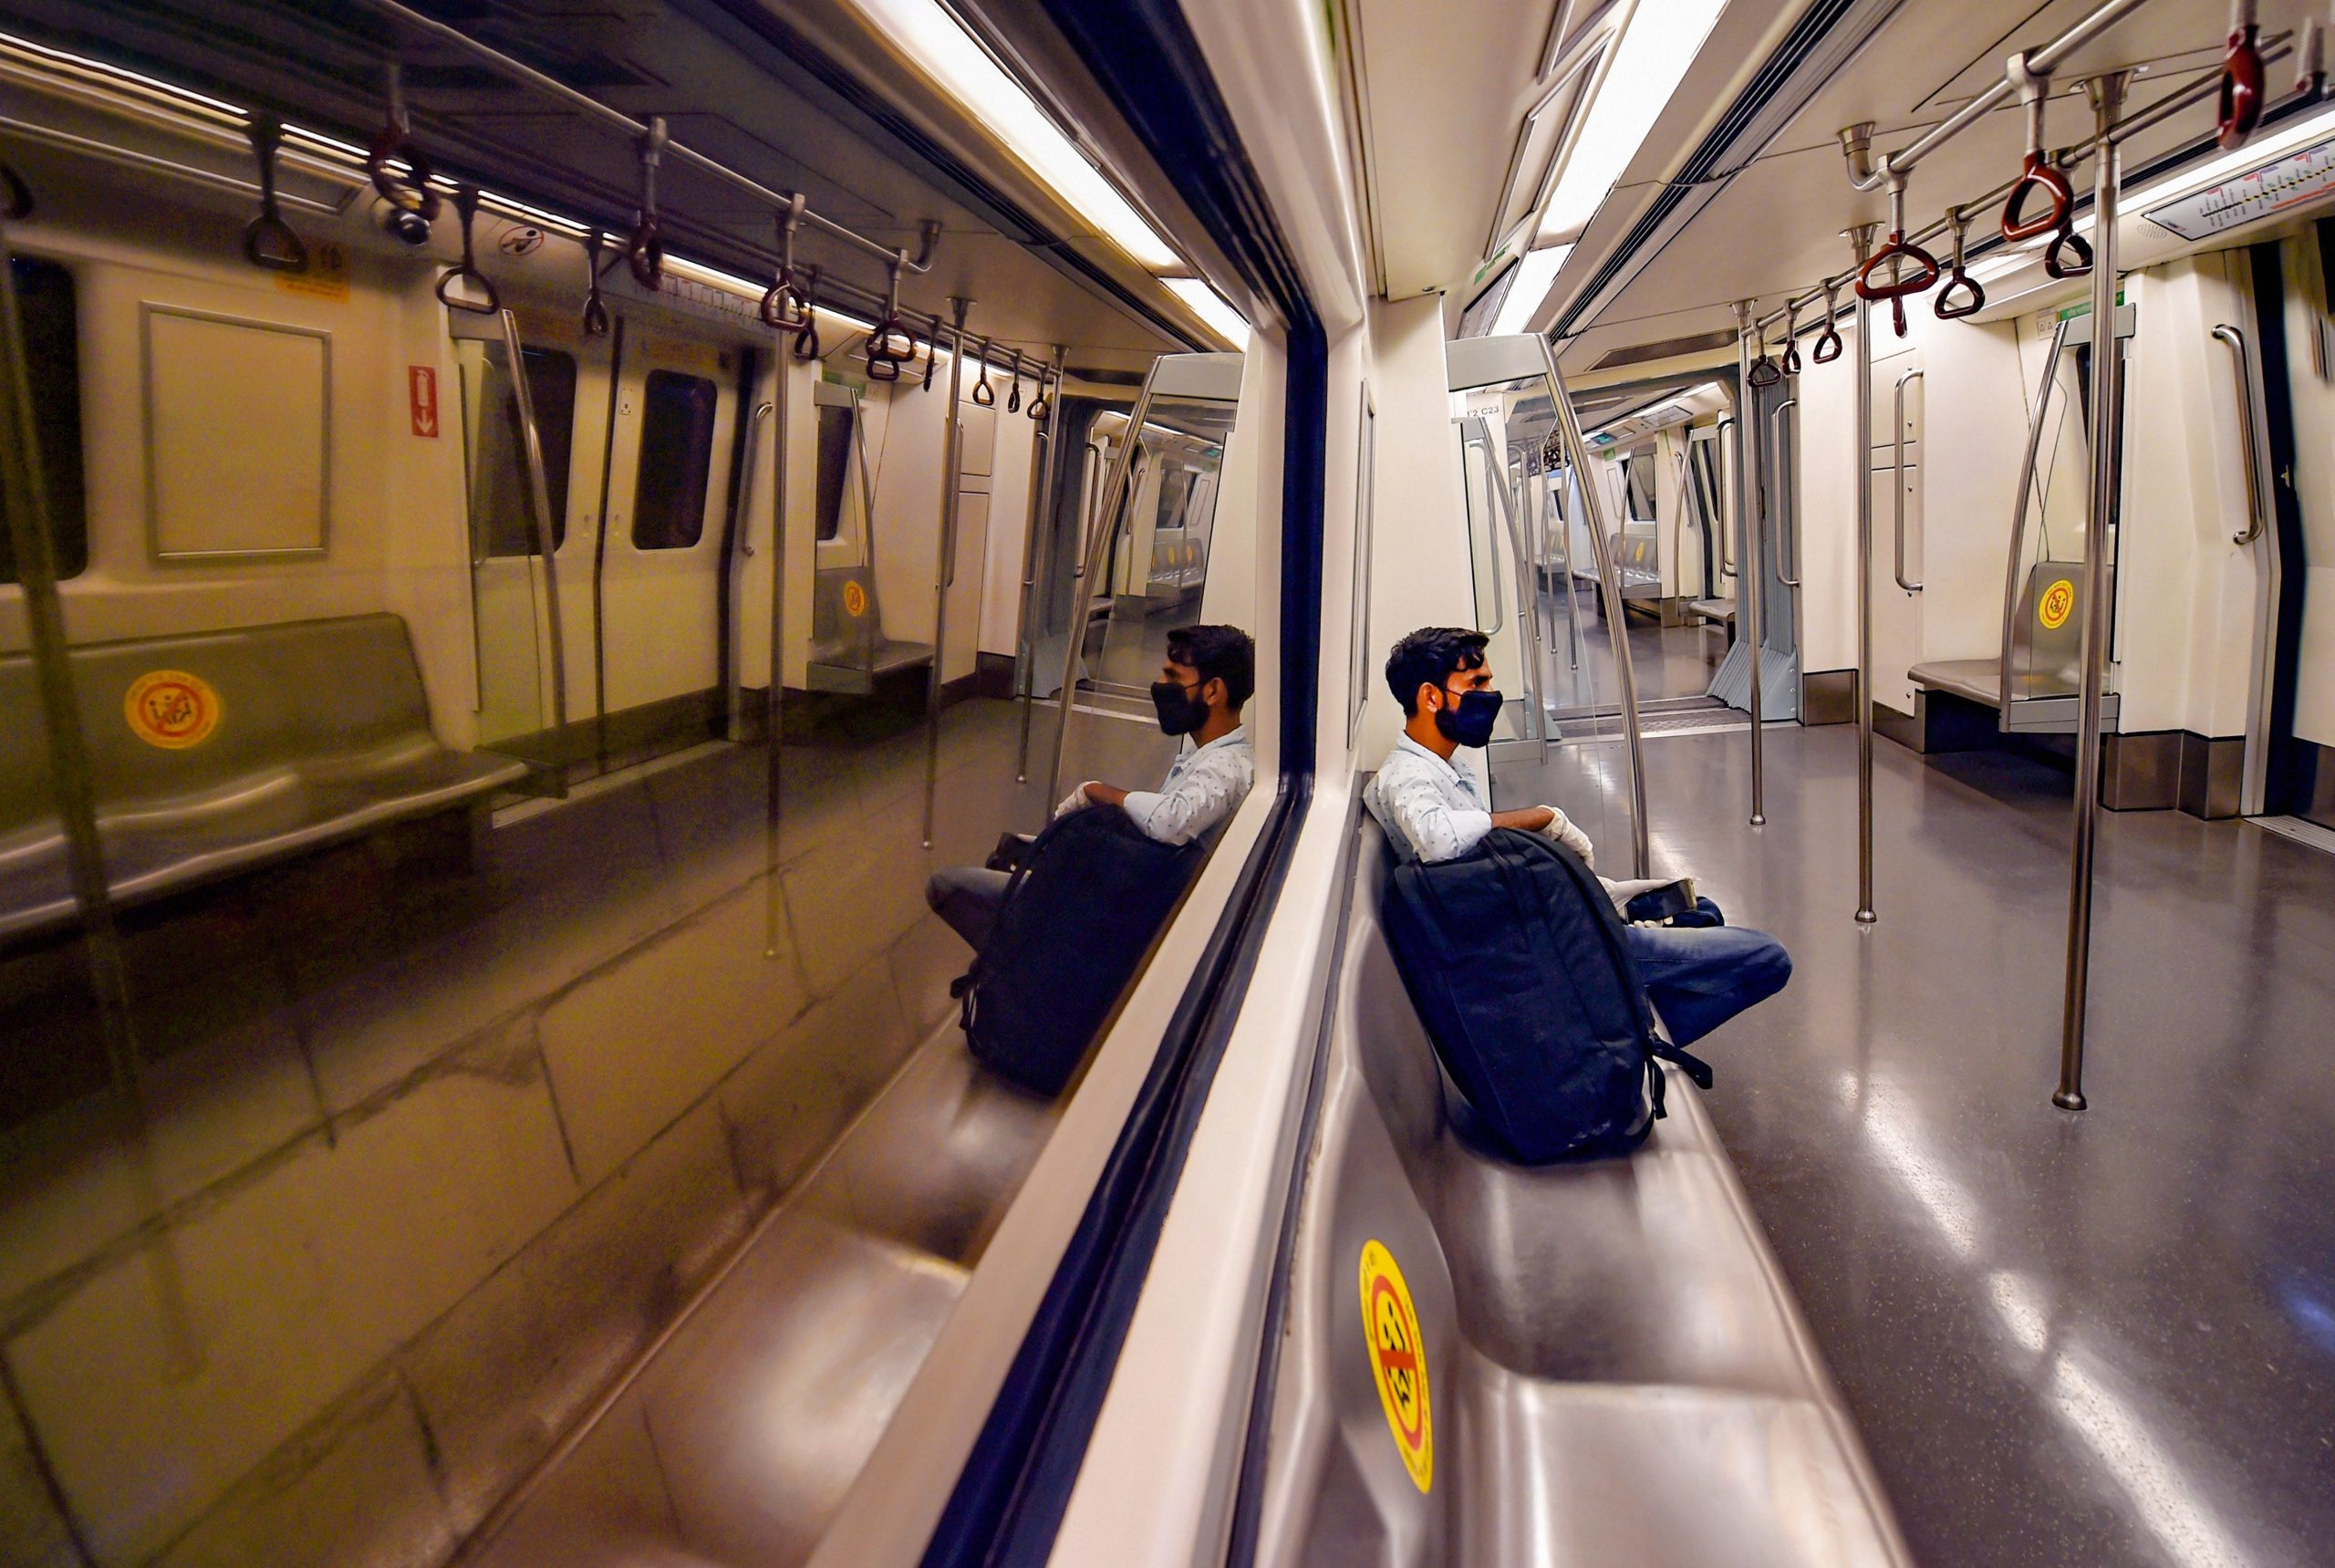 Metro back on track: More than 15,000 people travel on Day 1 in Delhi